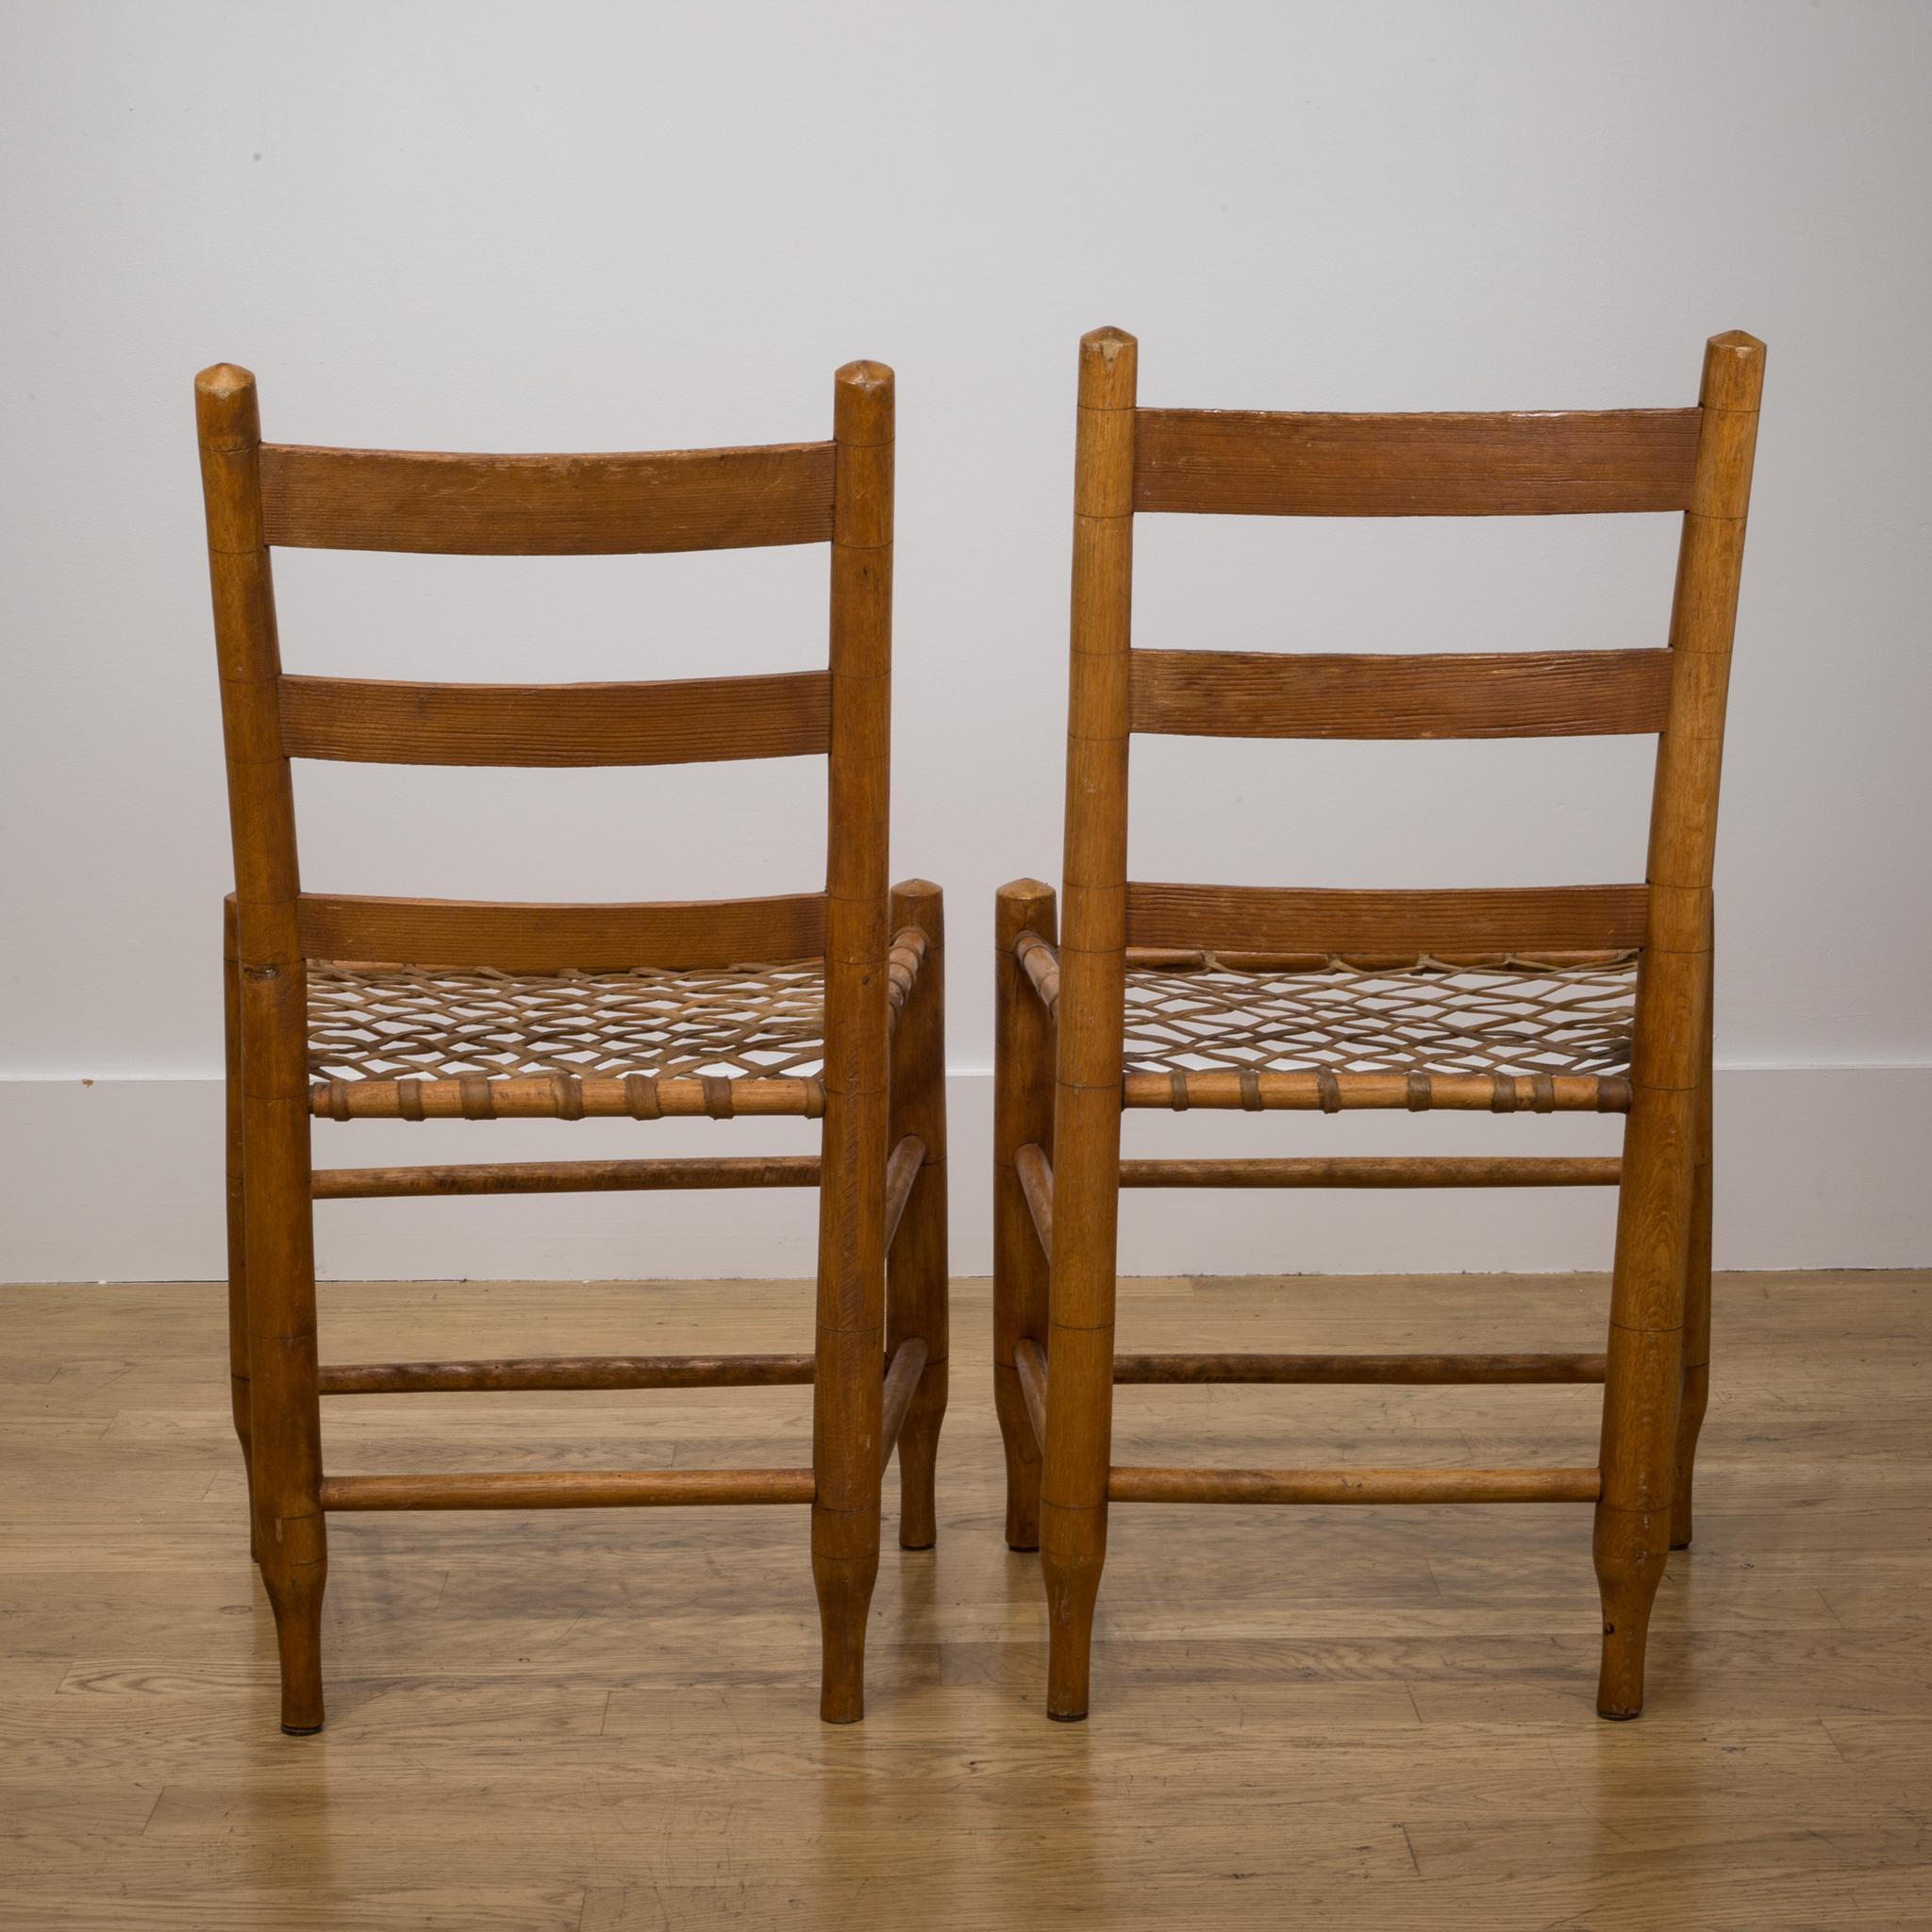 19th c. Handmade Wood/Rawhide Chairs from Historic  Oregon Commune c. 1856-1866 10